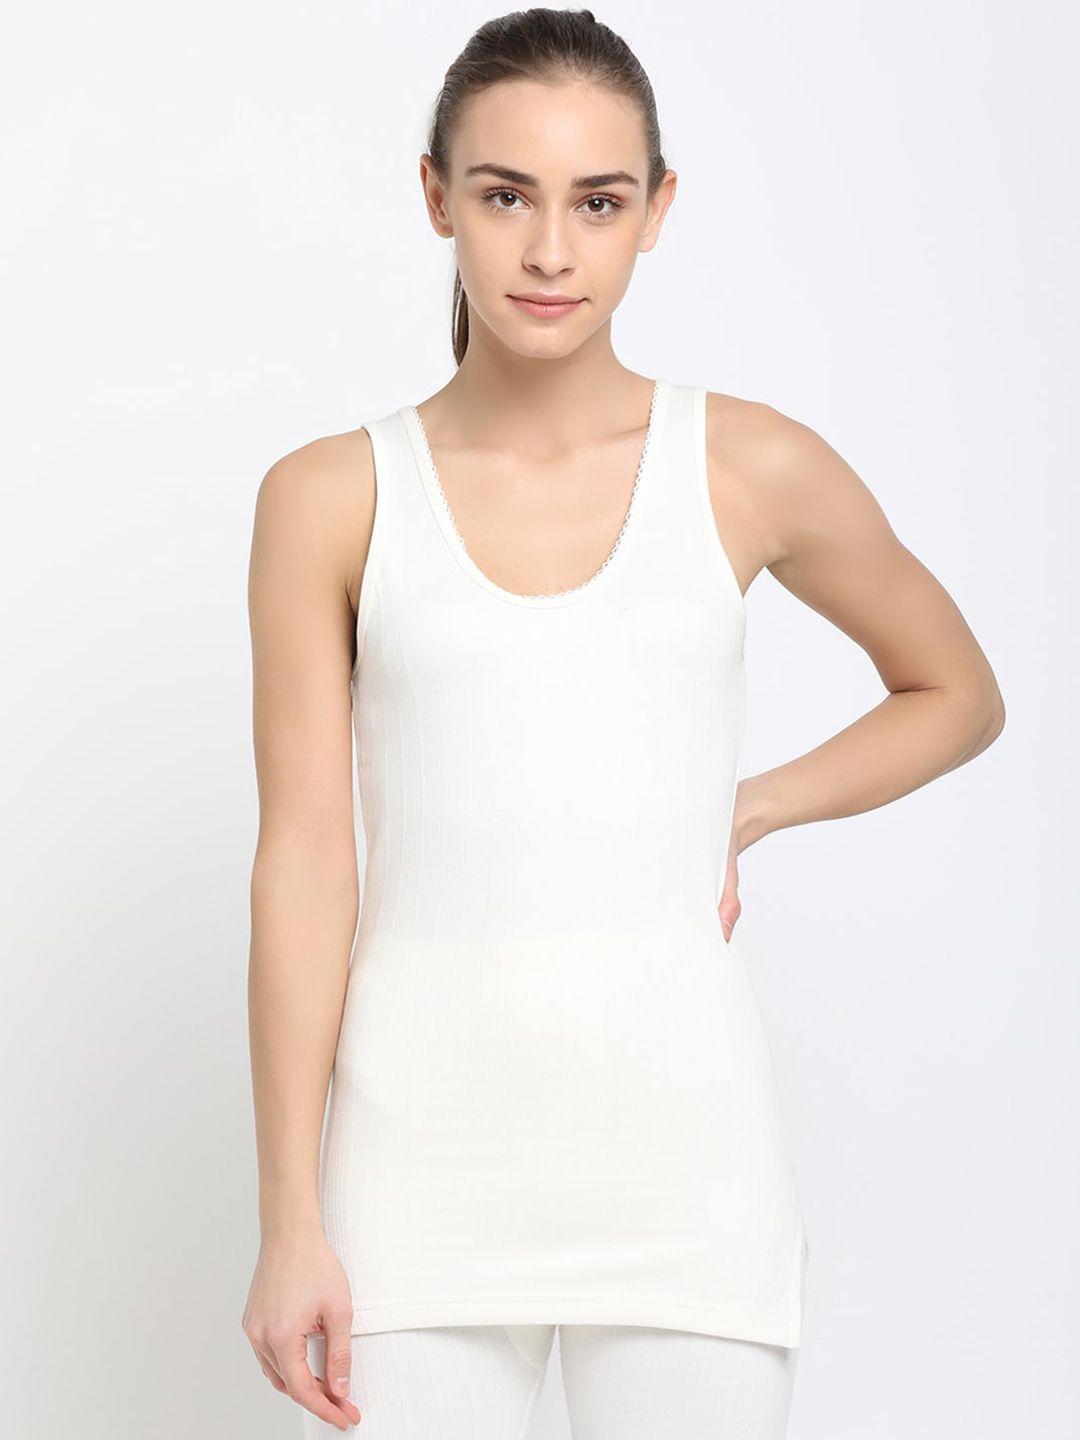 dixcy scott slimz women off-white solid sleeveless thermal camisole